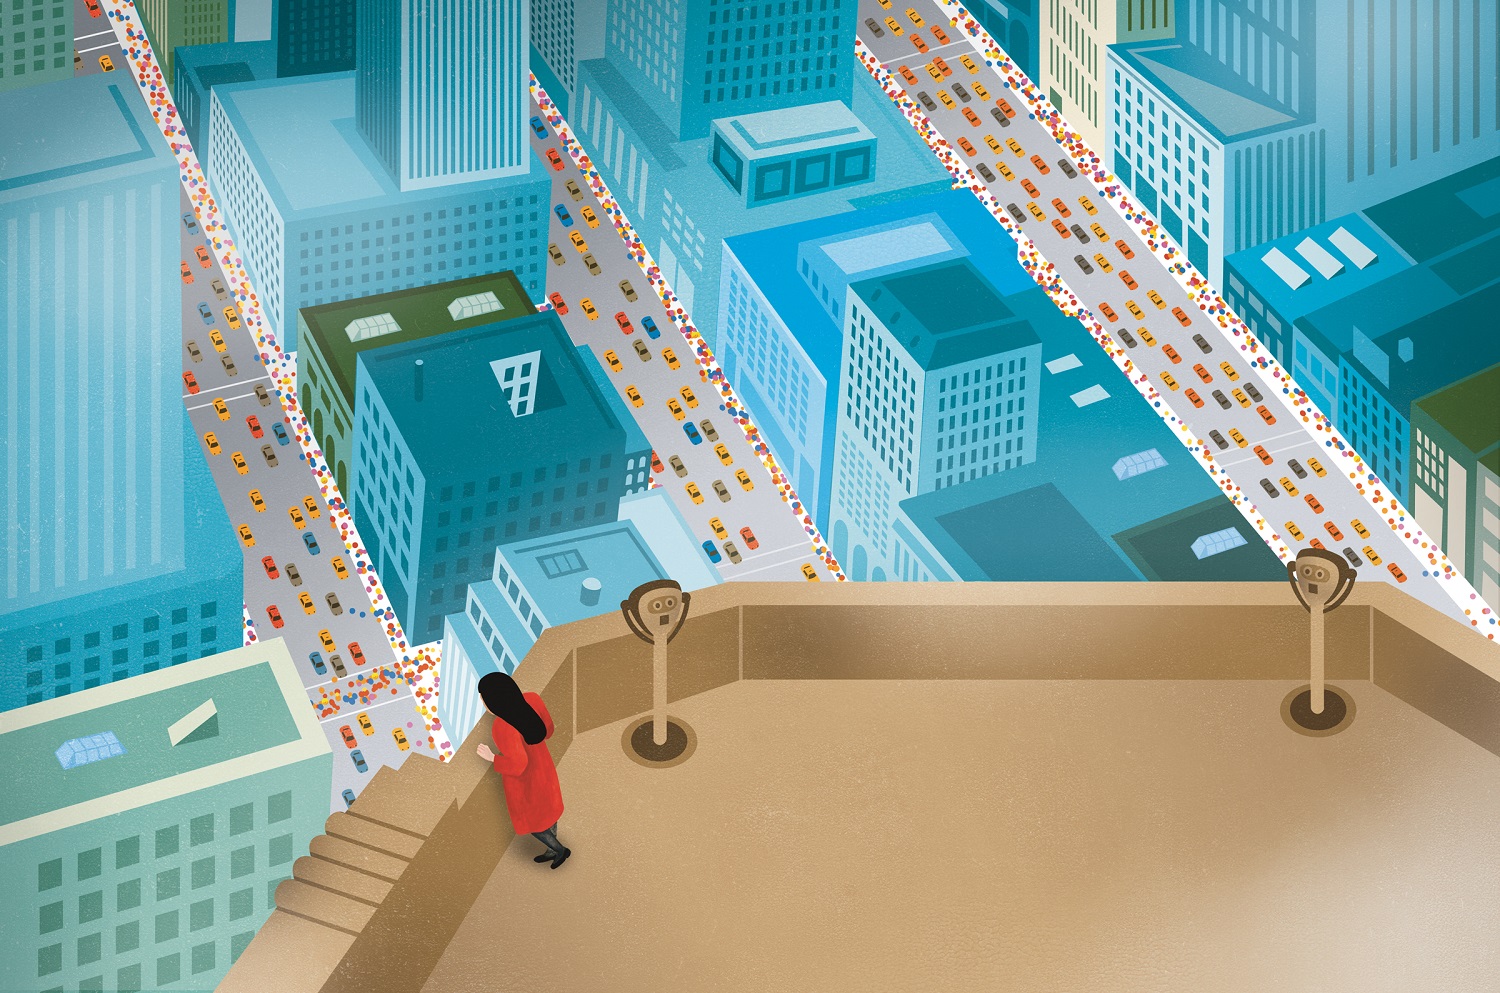 An illustration of Yayoi Kusama looking down from a tall building at the crowded streets of New York City.